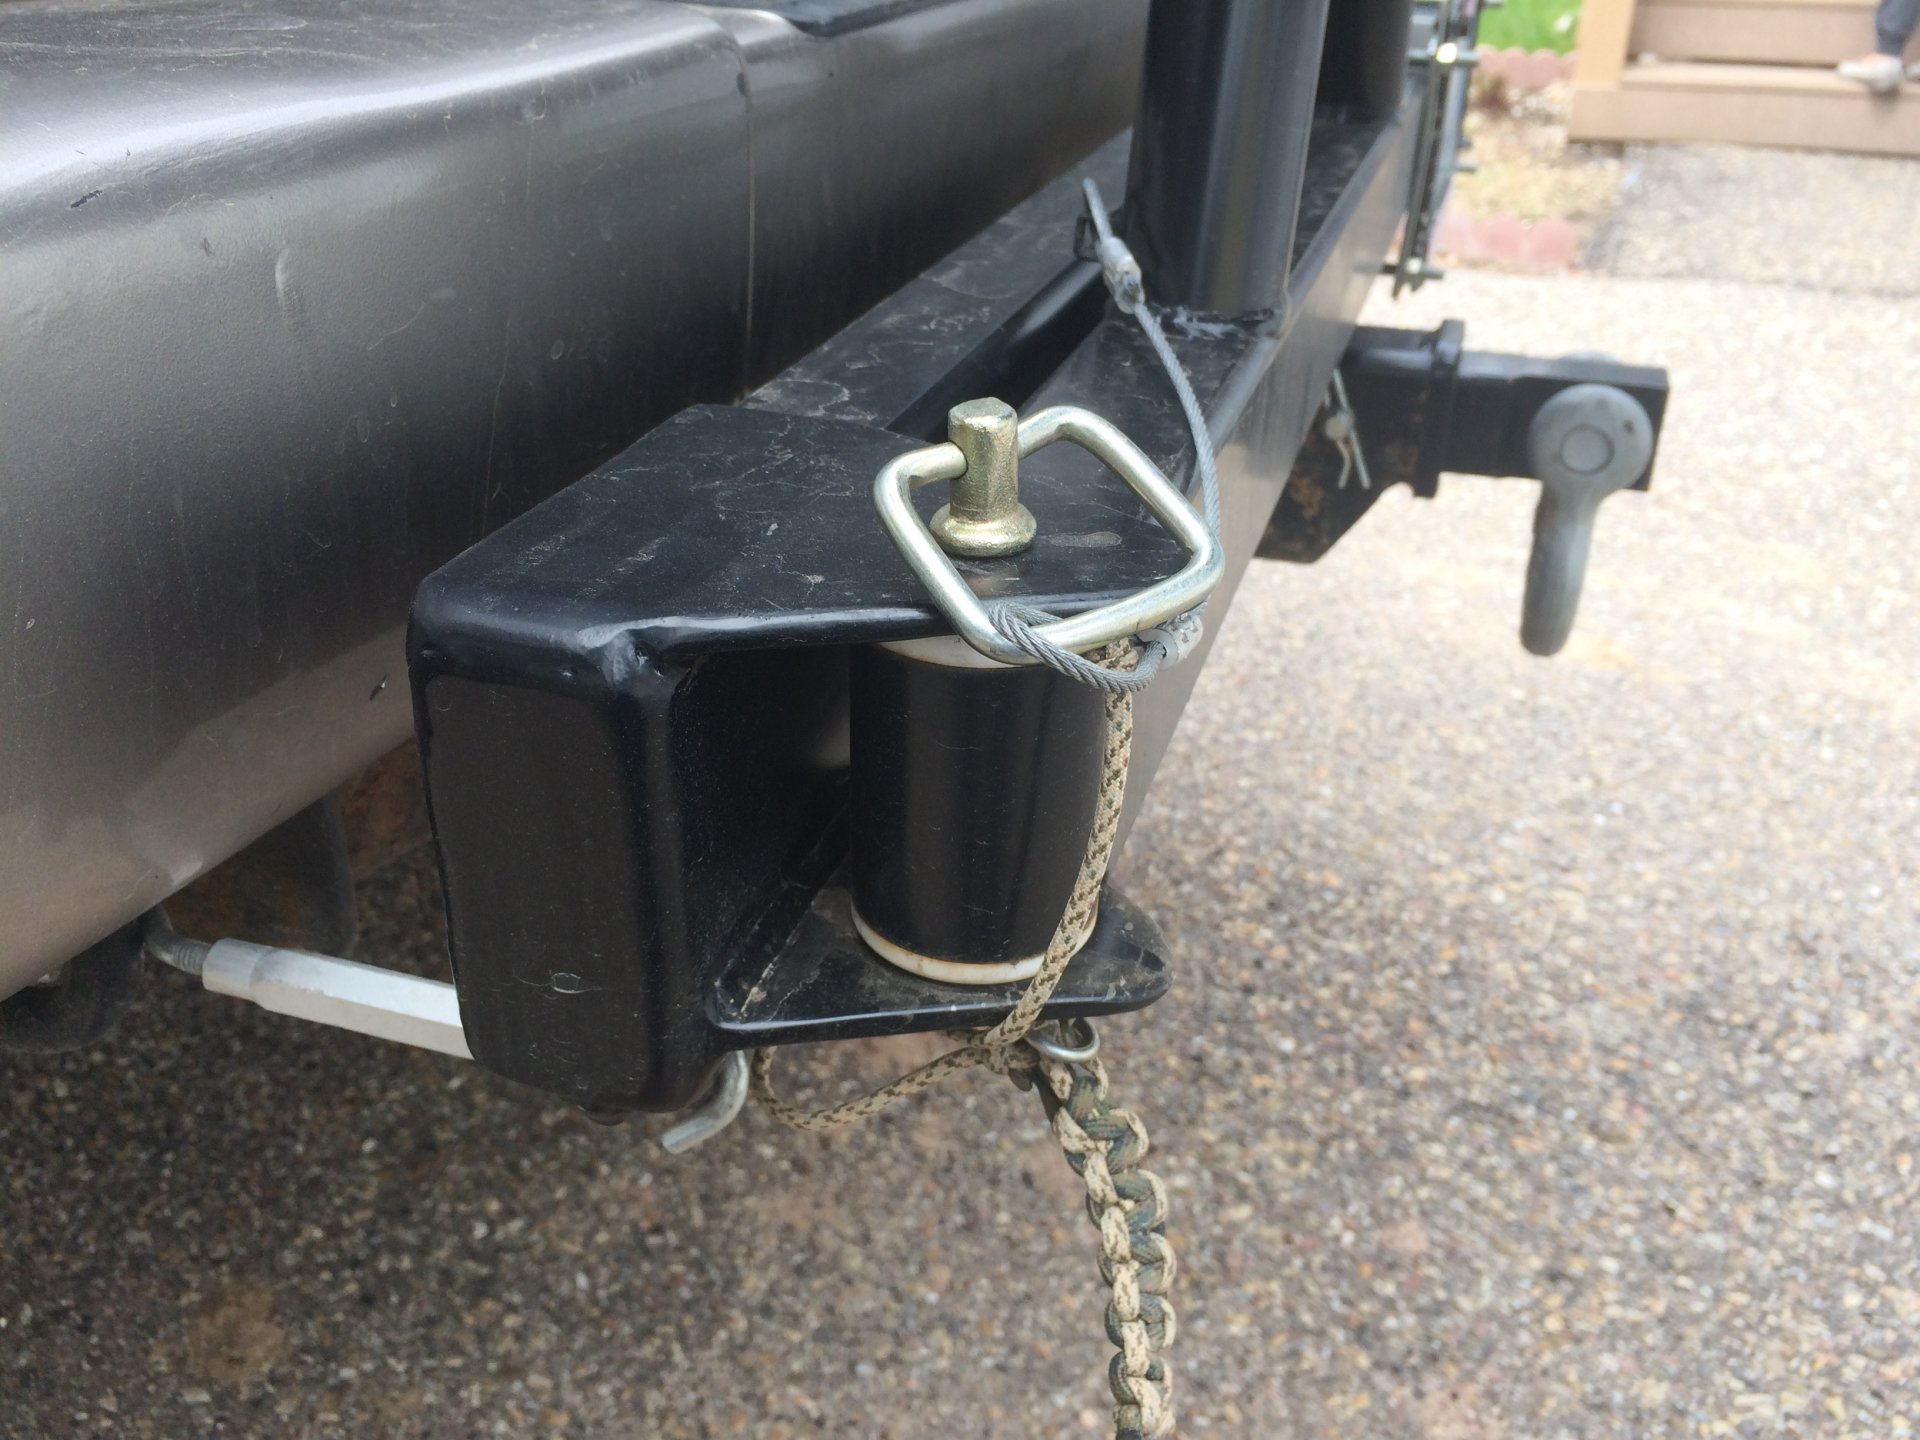 For Sale - Hitch Mounted Swingout Spare Tire Carrier | IH8MUD Forum Spare Tire Hitch Mount Swing Away Carrier